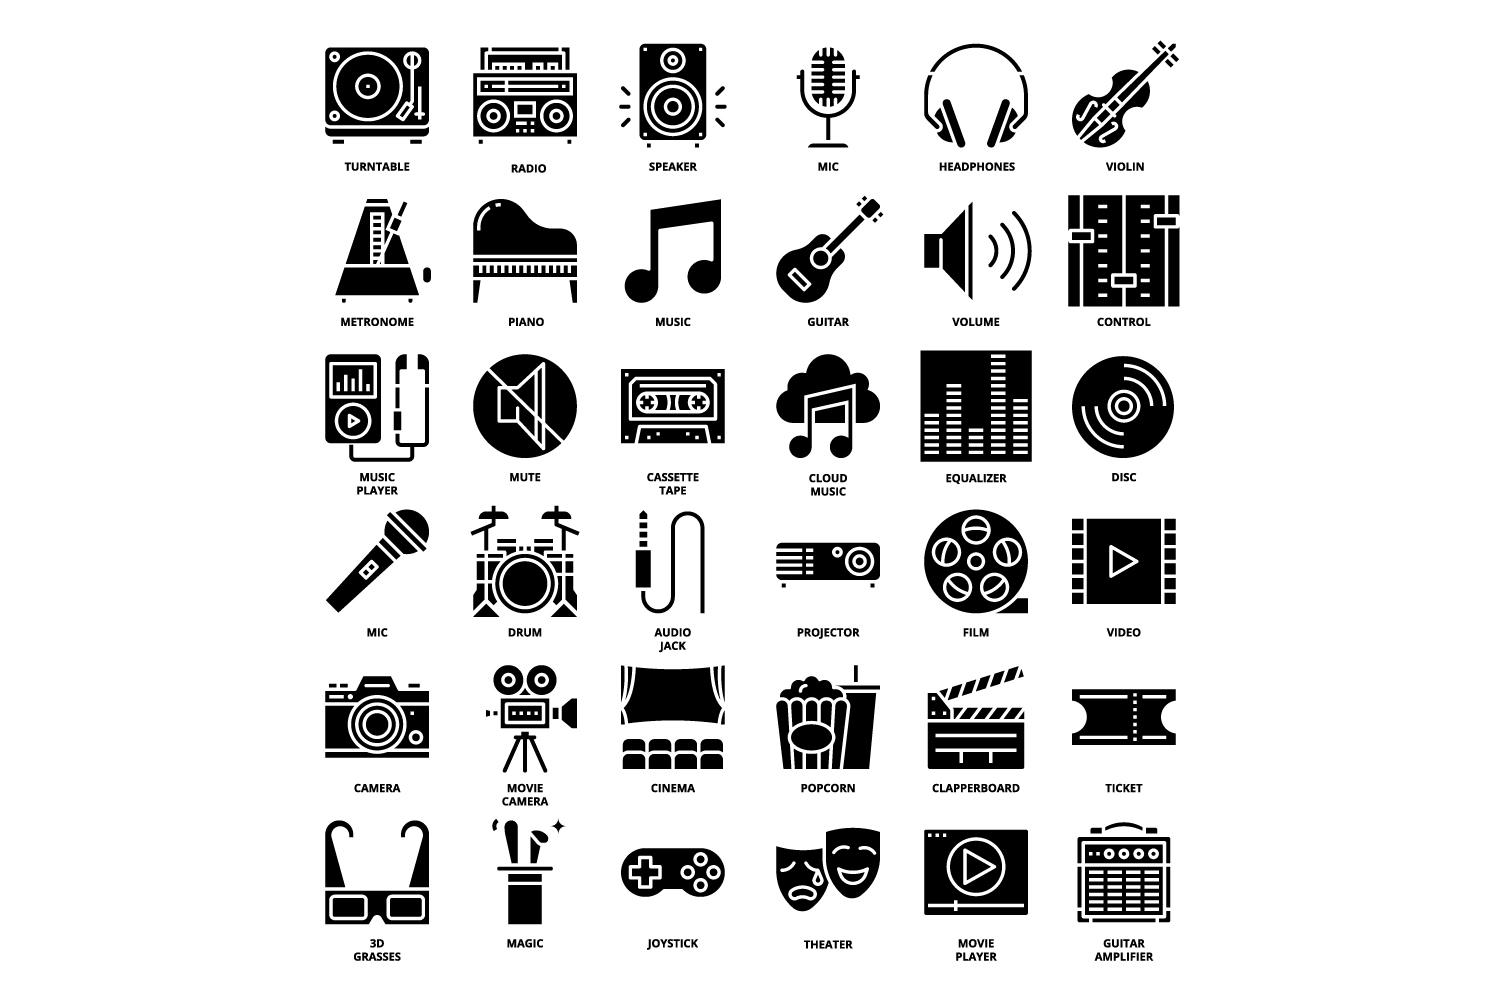 Black and white image of various types of electronics.